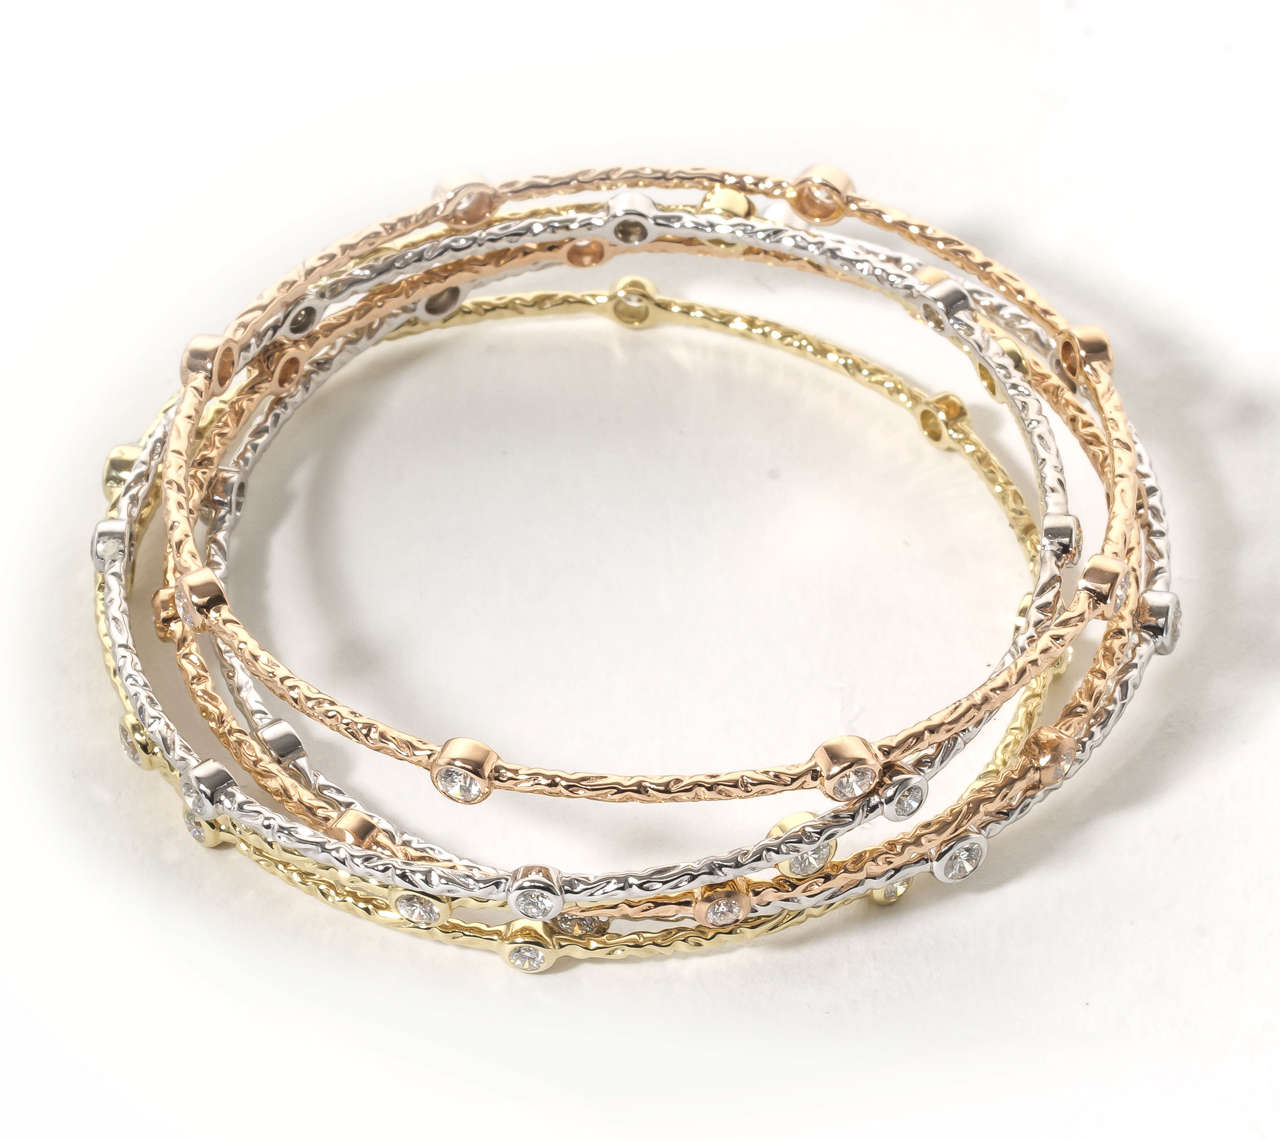 An amazing set of 6 multicolored and size diamond slip on bangles !!

(1) white gold with bangle .45 carats of white round brilliant diamonds
(1) white gold with bangle .90 carats of white round brilliant diamonds
(1) yellow gold with bangle .45